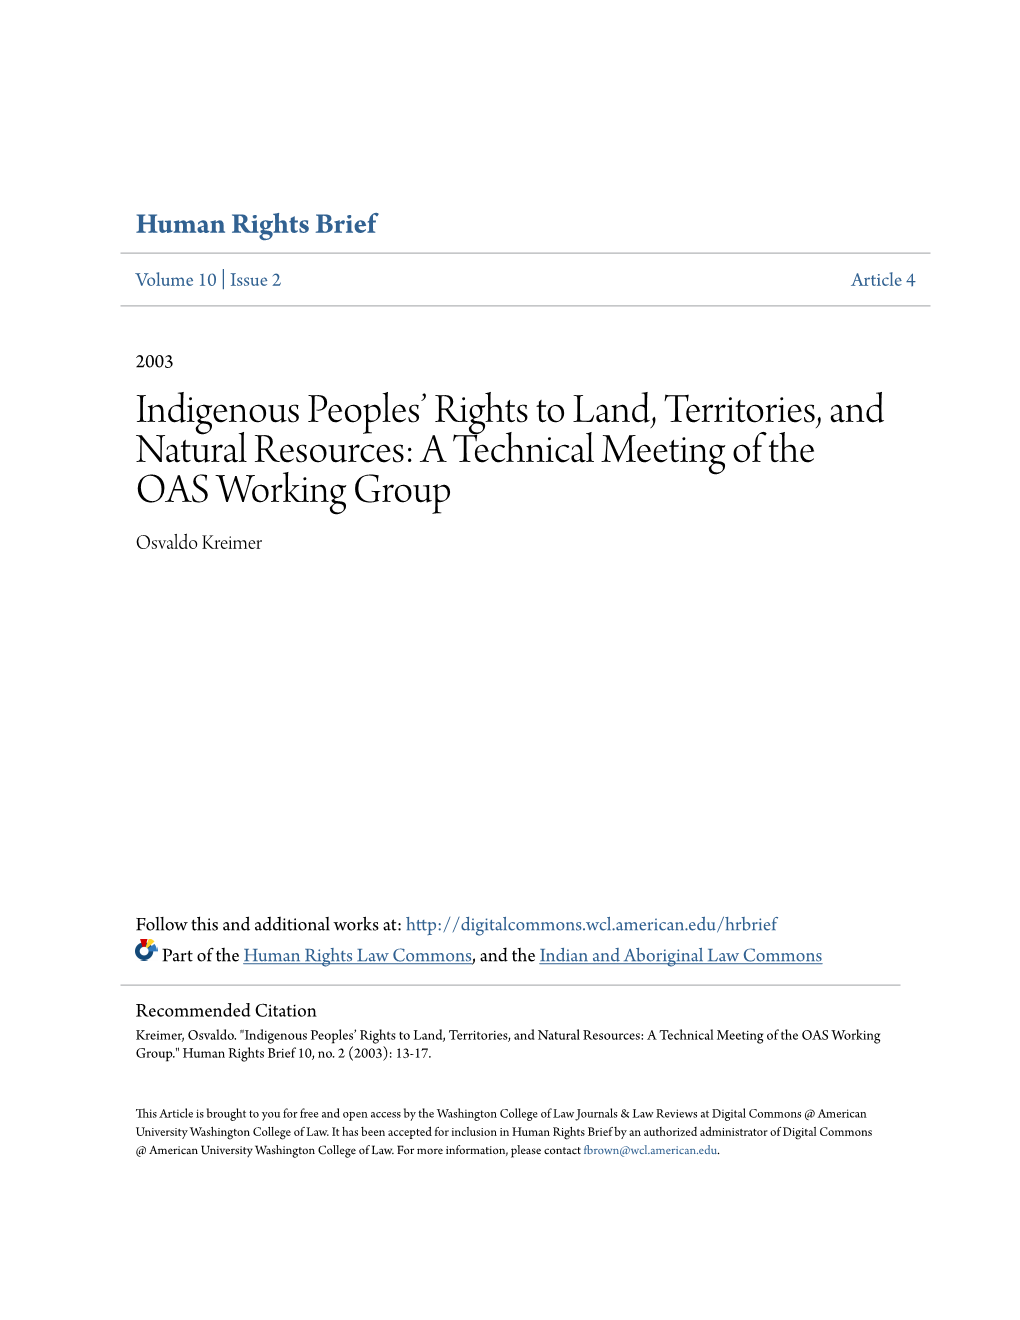 Indigenous Peoples' Rights to Land, Territories, and Natural Resources